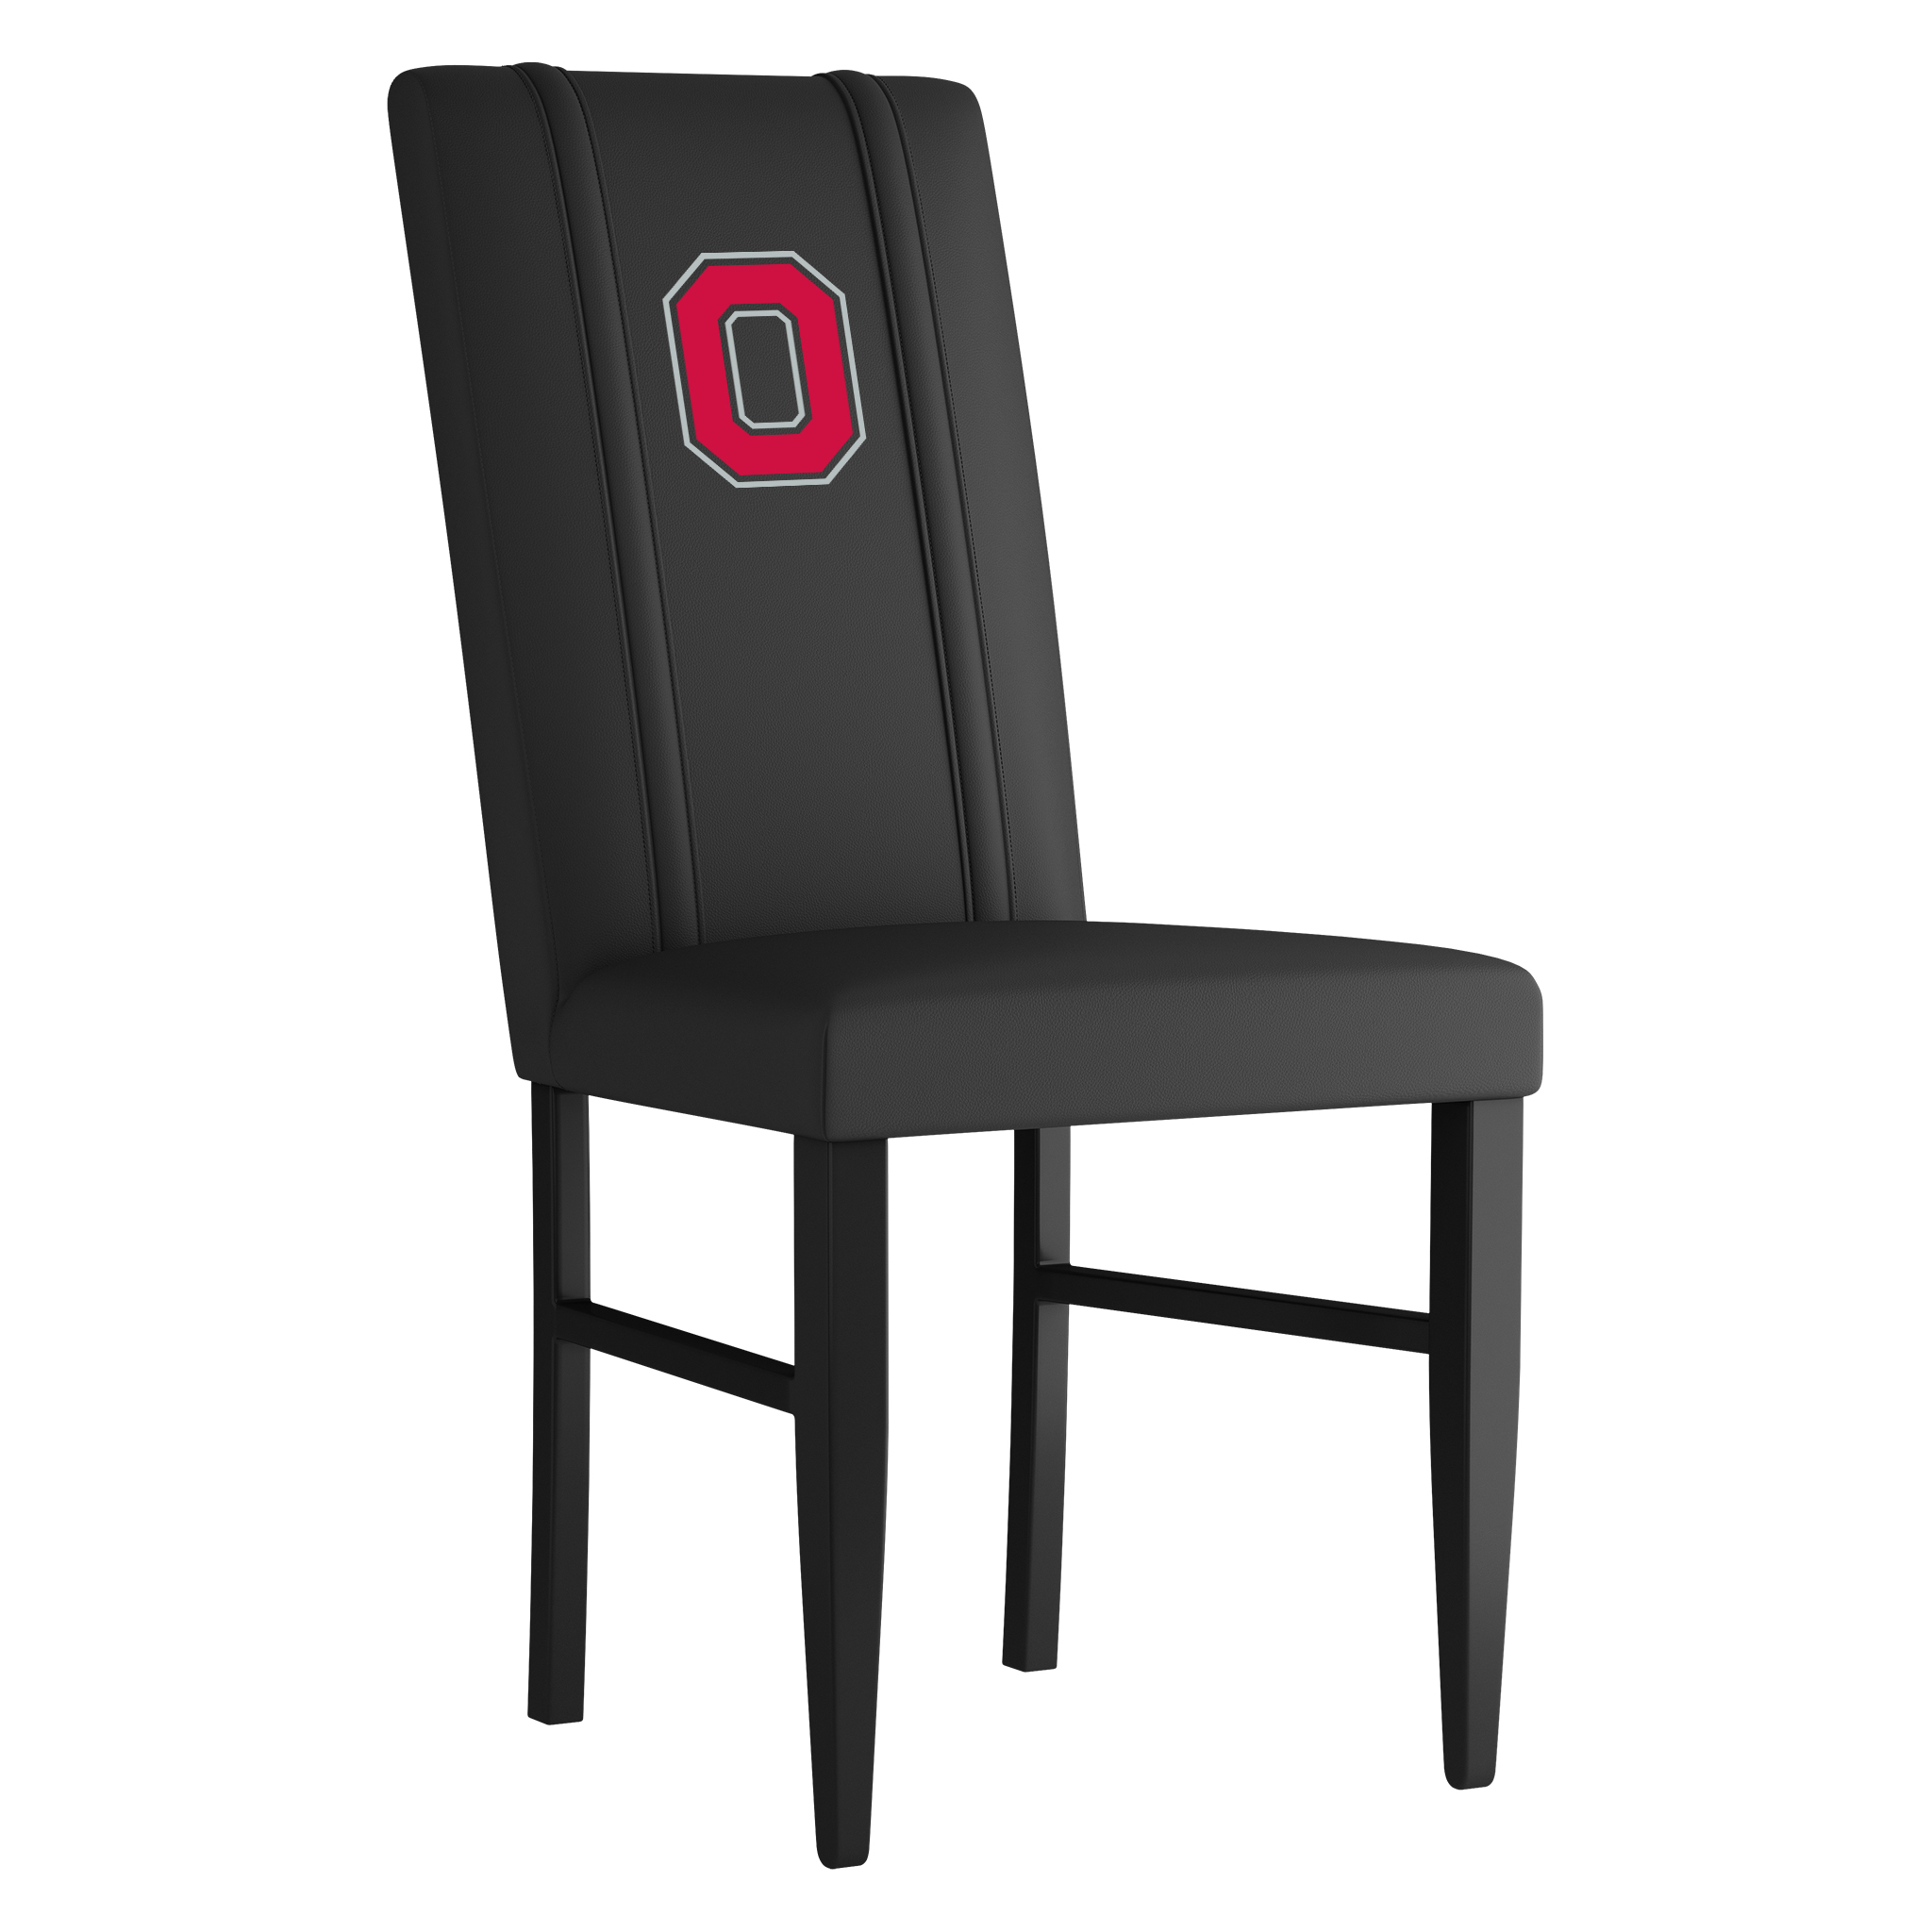 Ohio State Side Chair 2000 With Ohio State Primary Logo